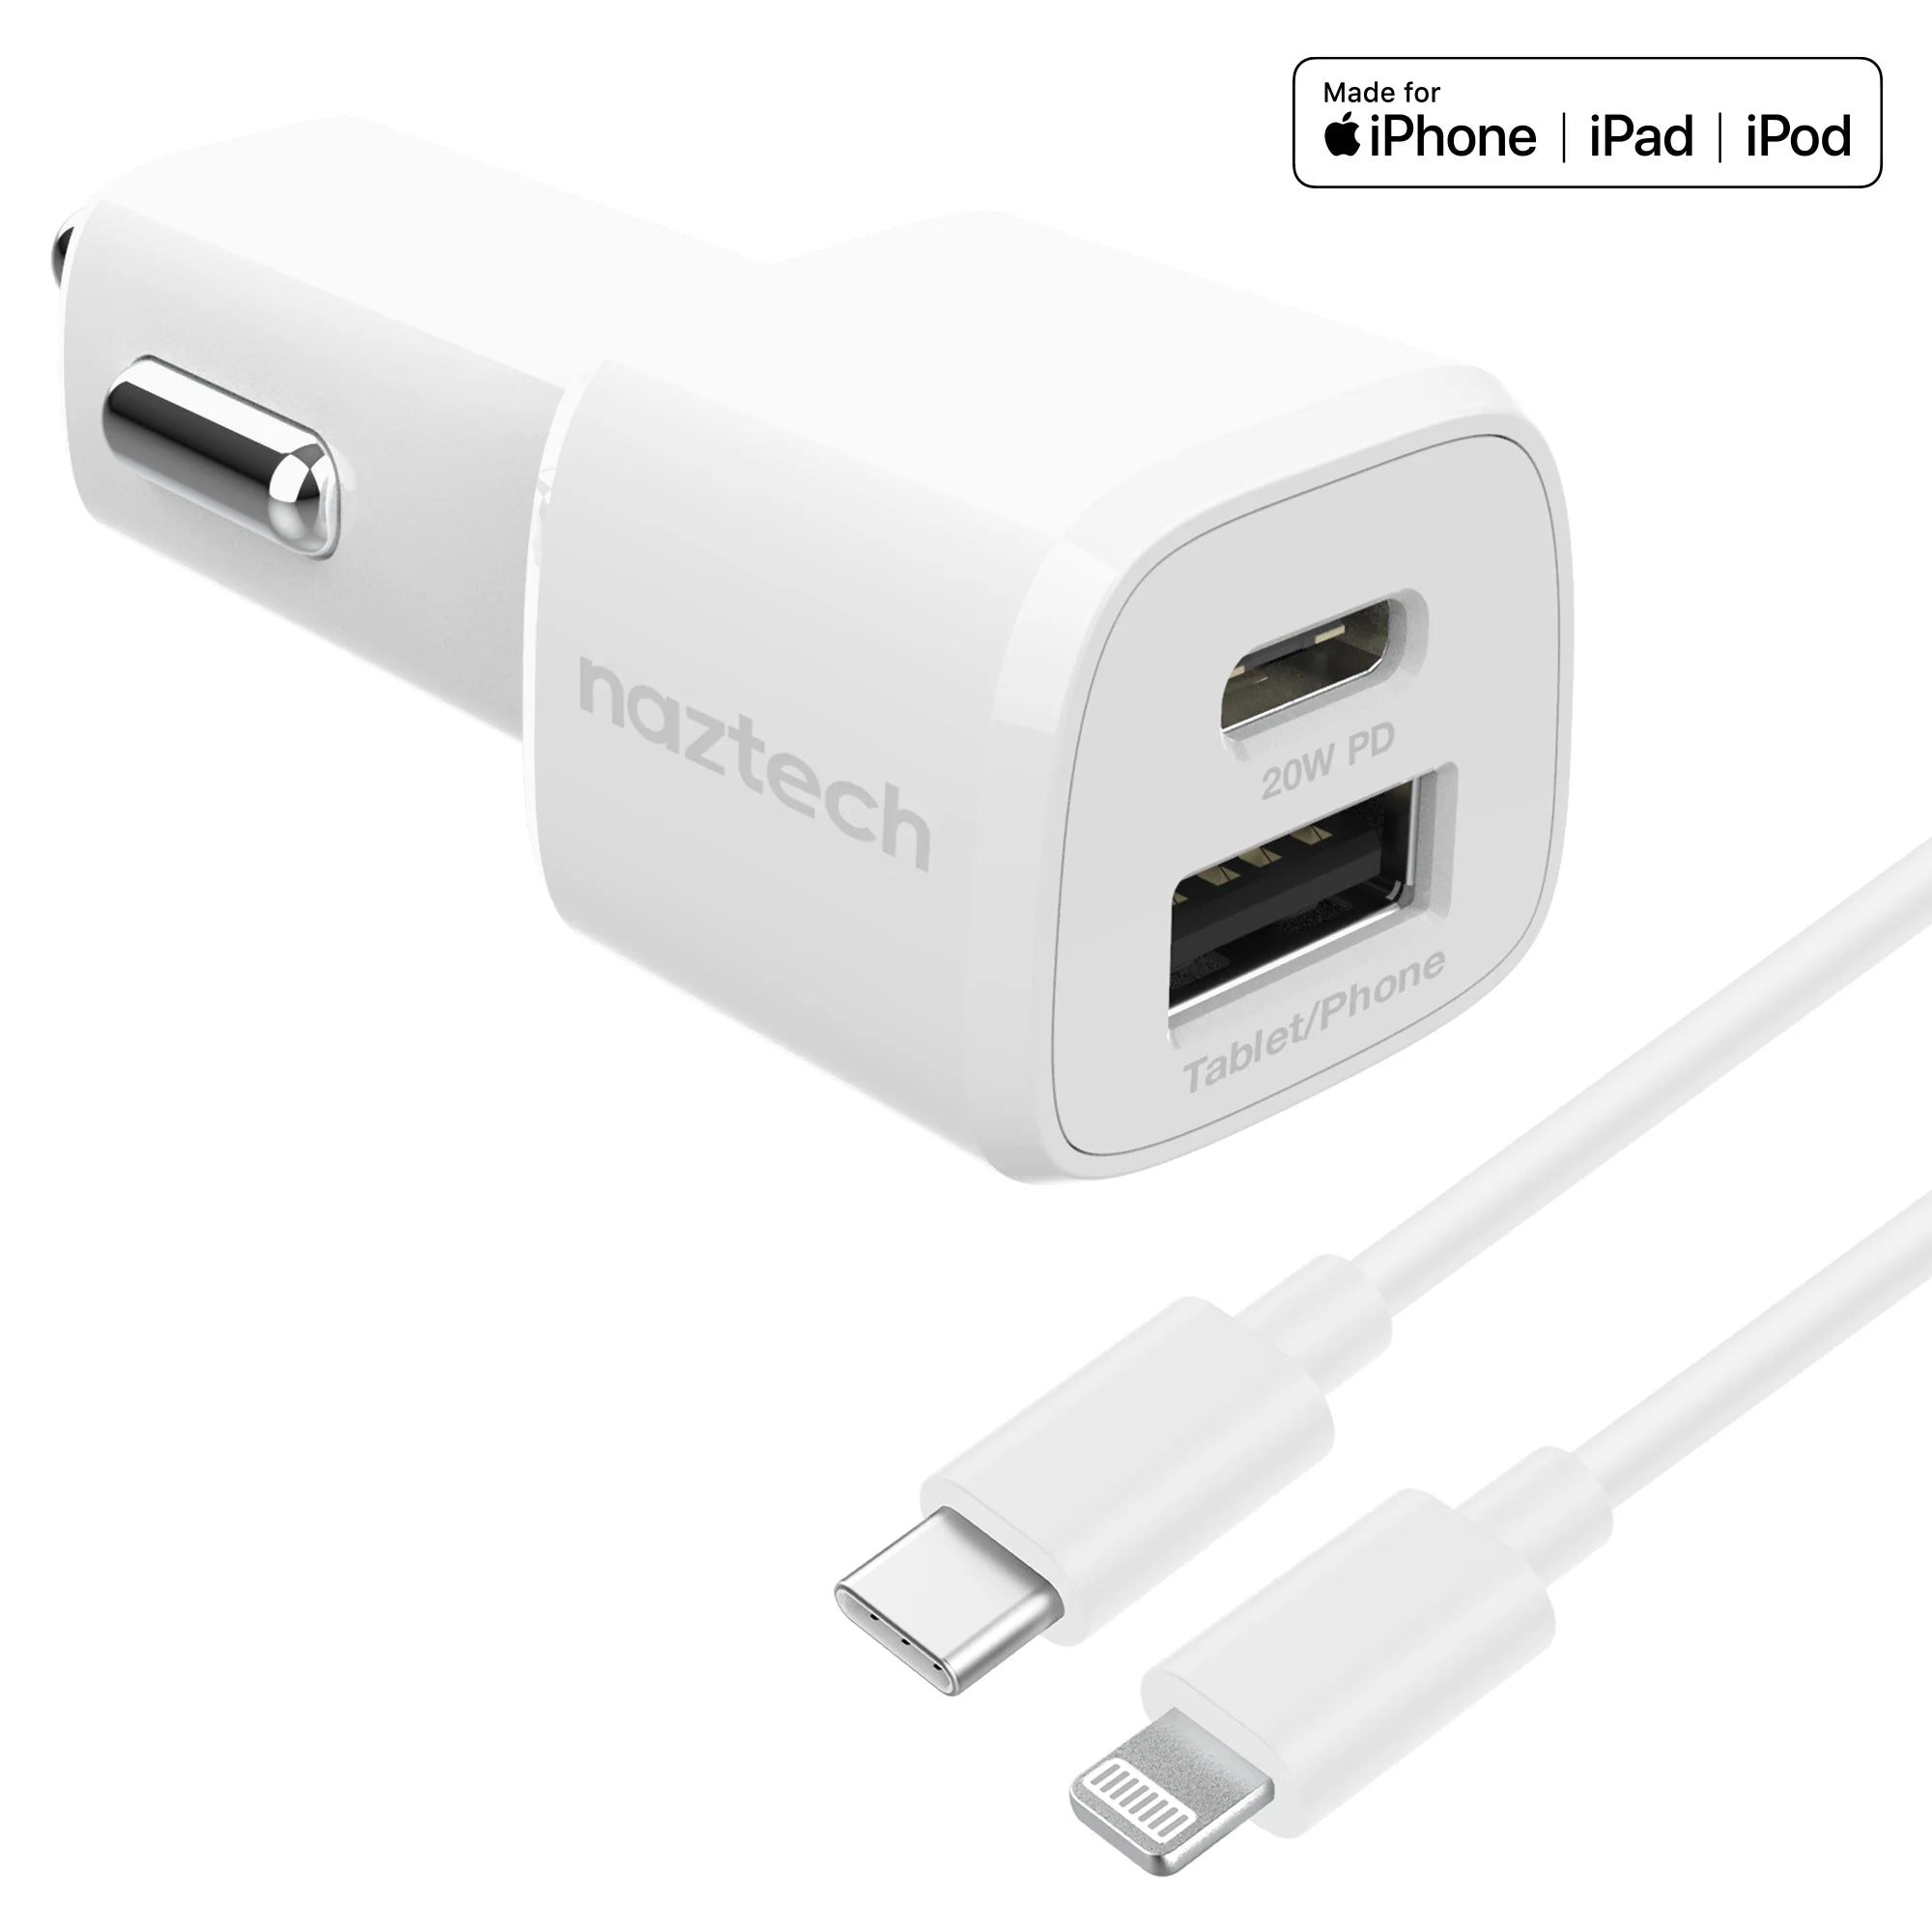 Dual USB 12W Premium Car Charger with Lightning Cable 4ft White